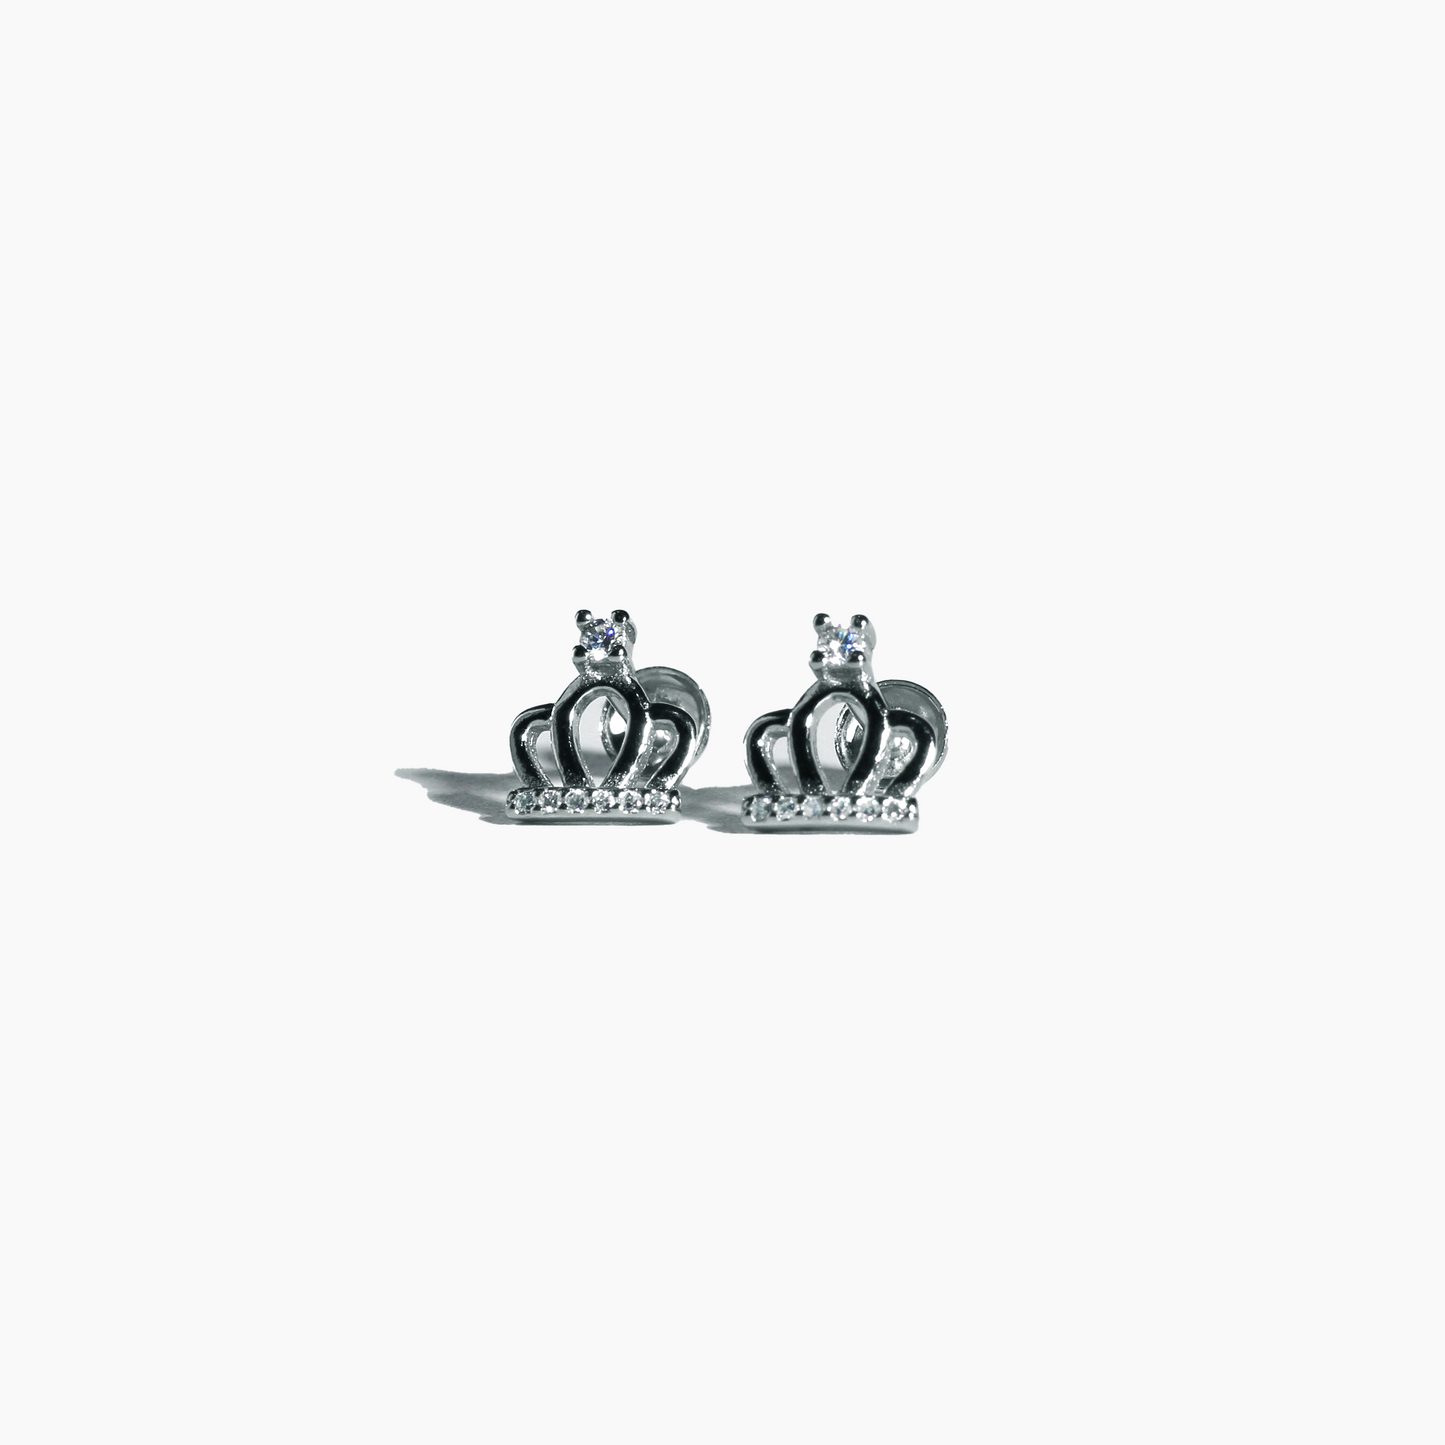 Queens crown 925 Sterling Silver Studs